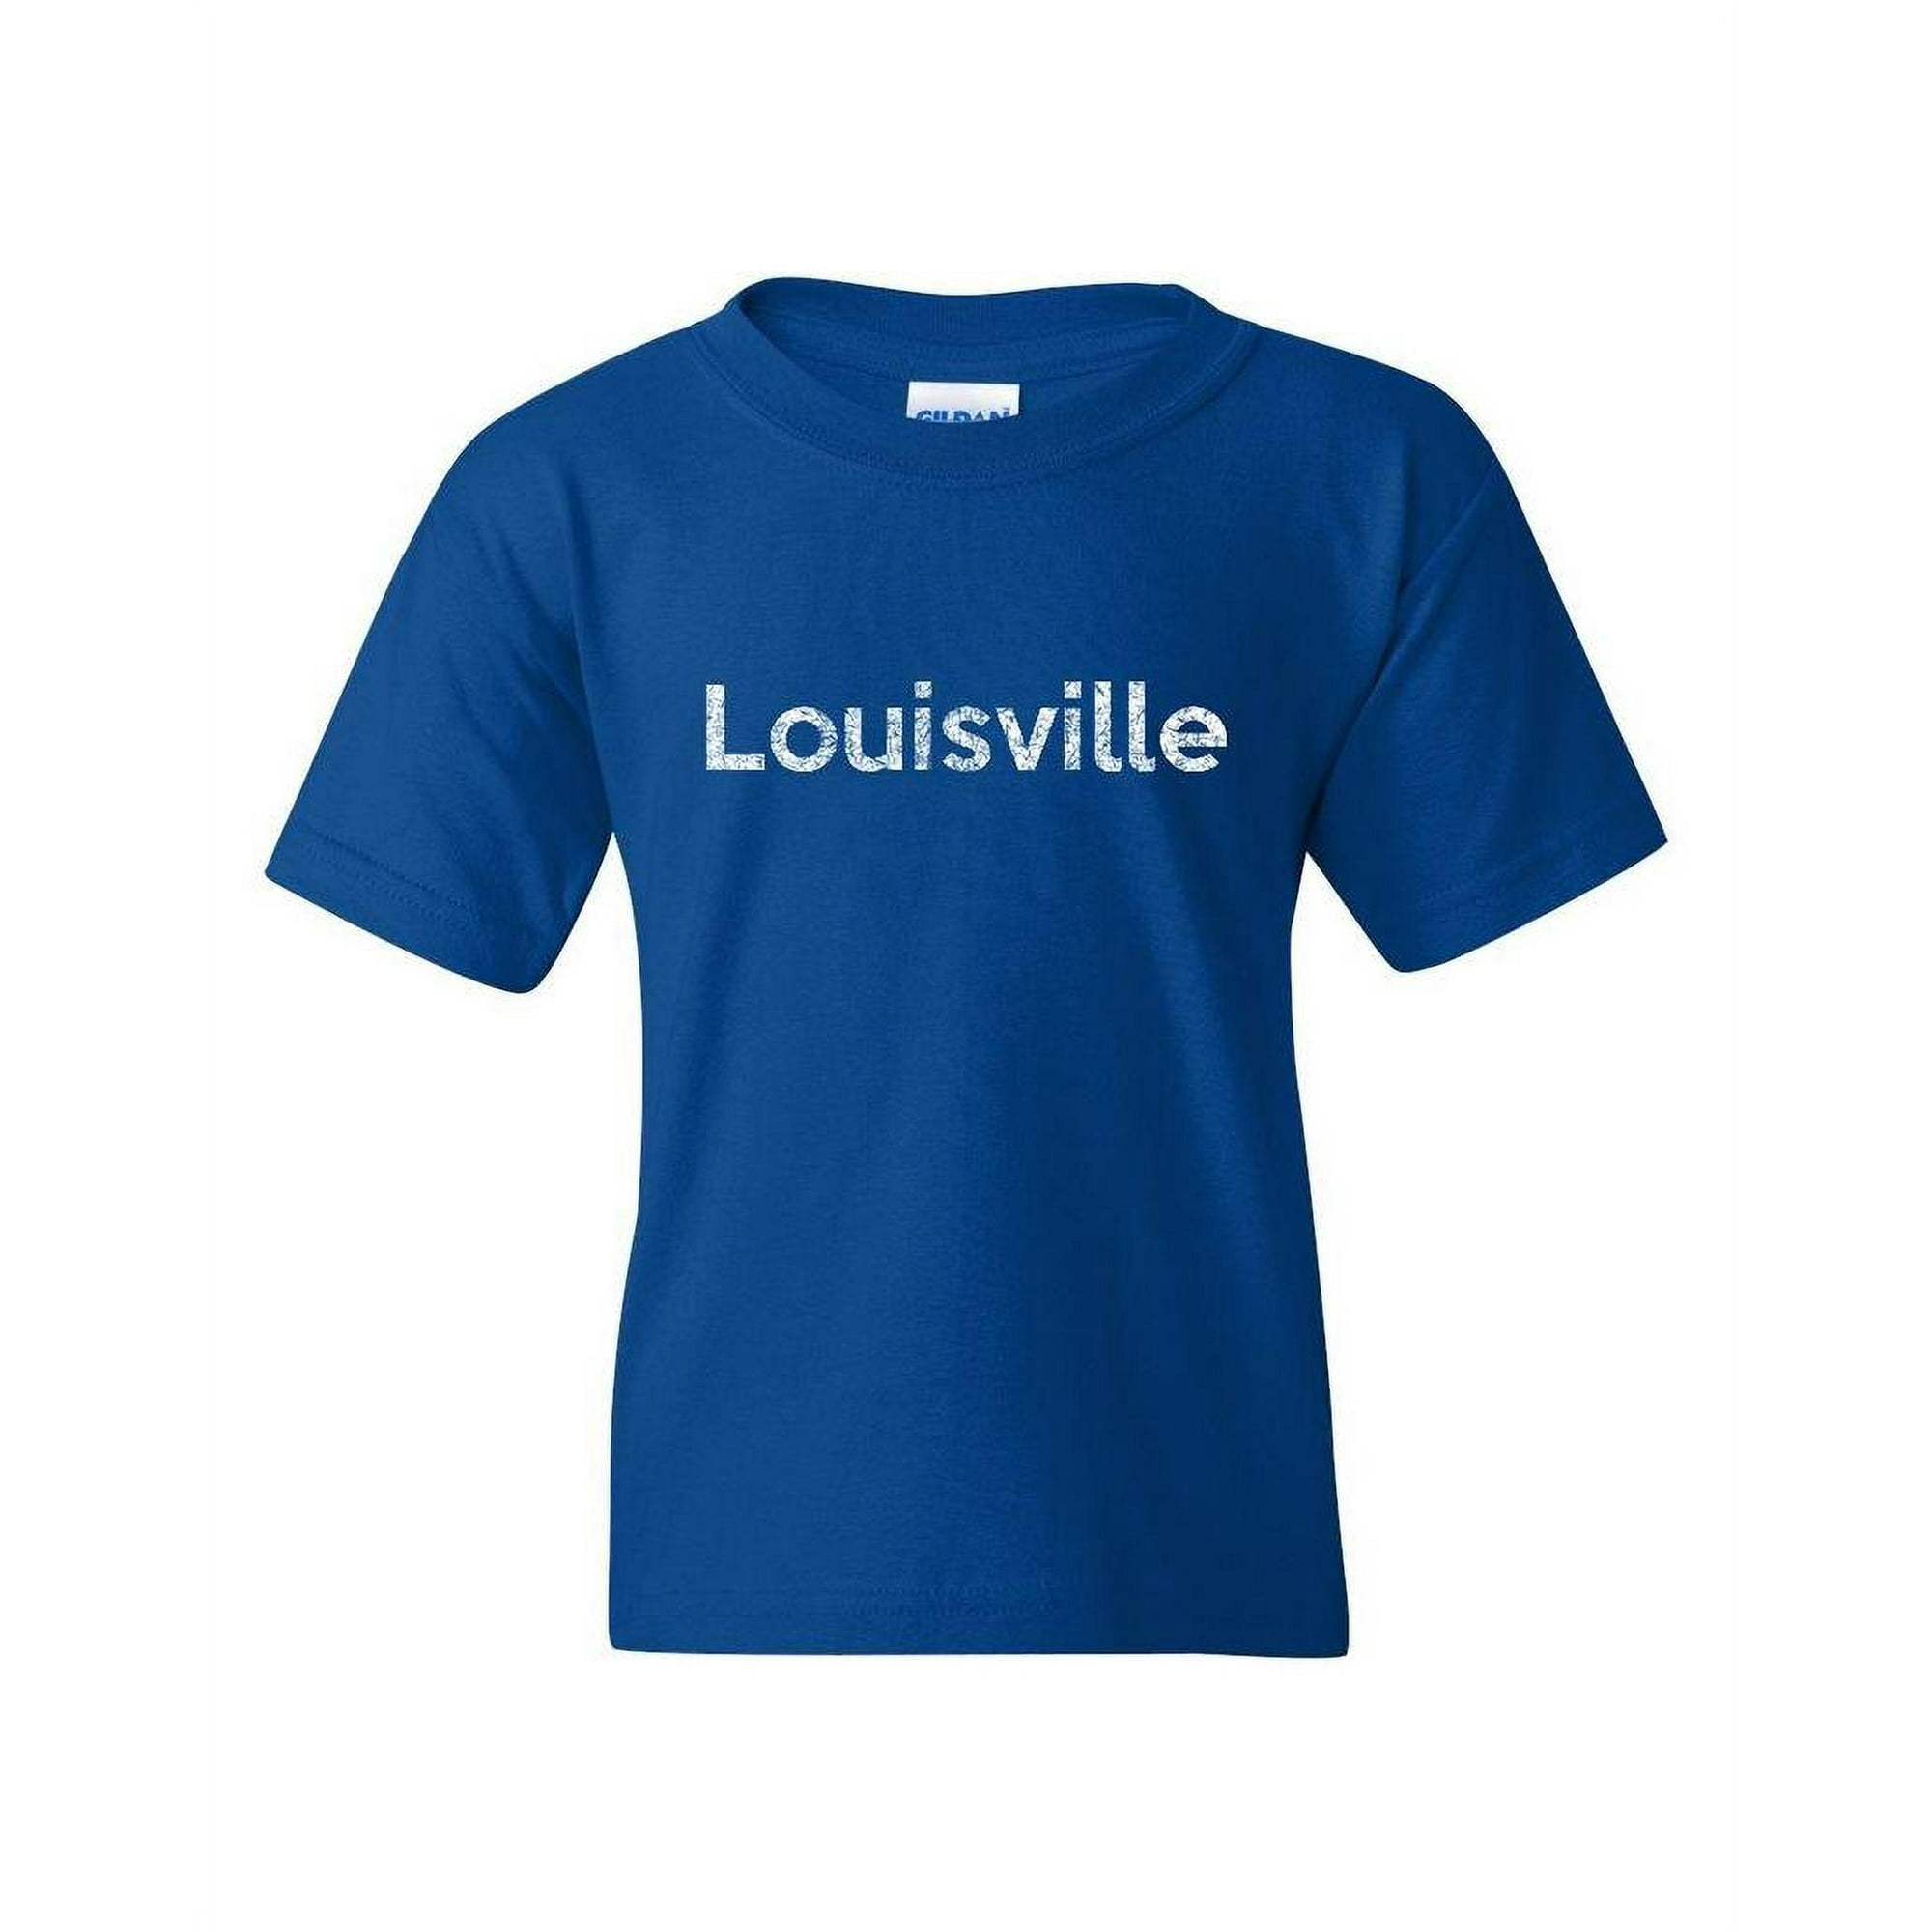  University of Louisville Official One Color Logo Unisex Youth  T Shirt,Athletic Heather, Small : Sports & Outdoors